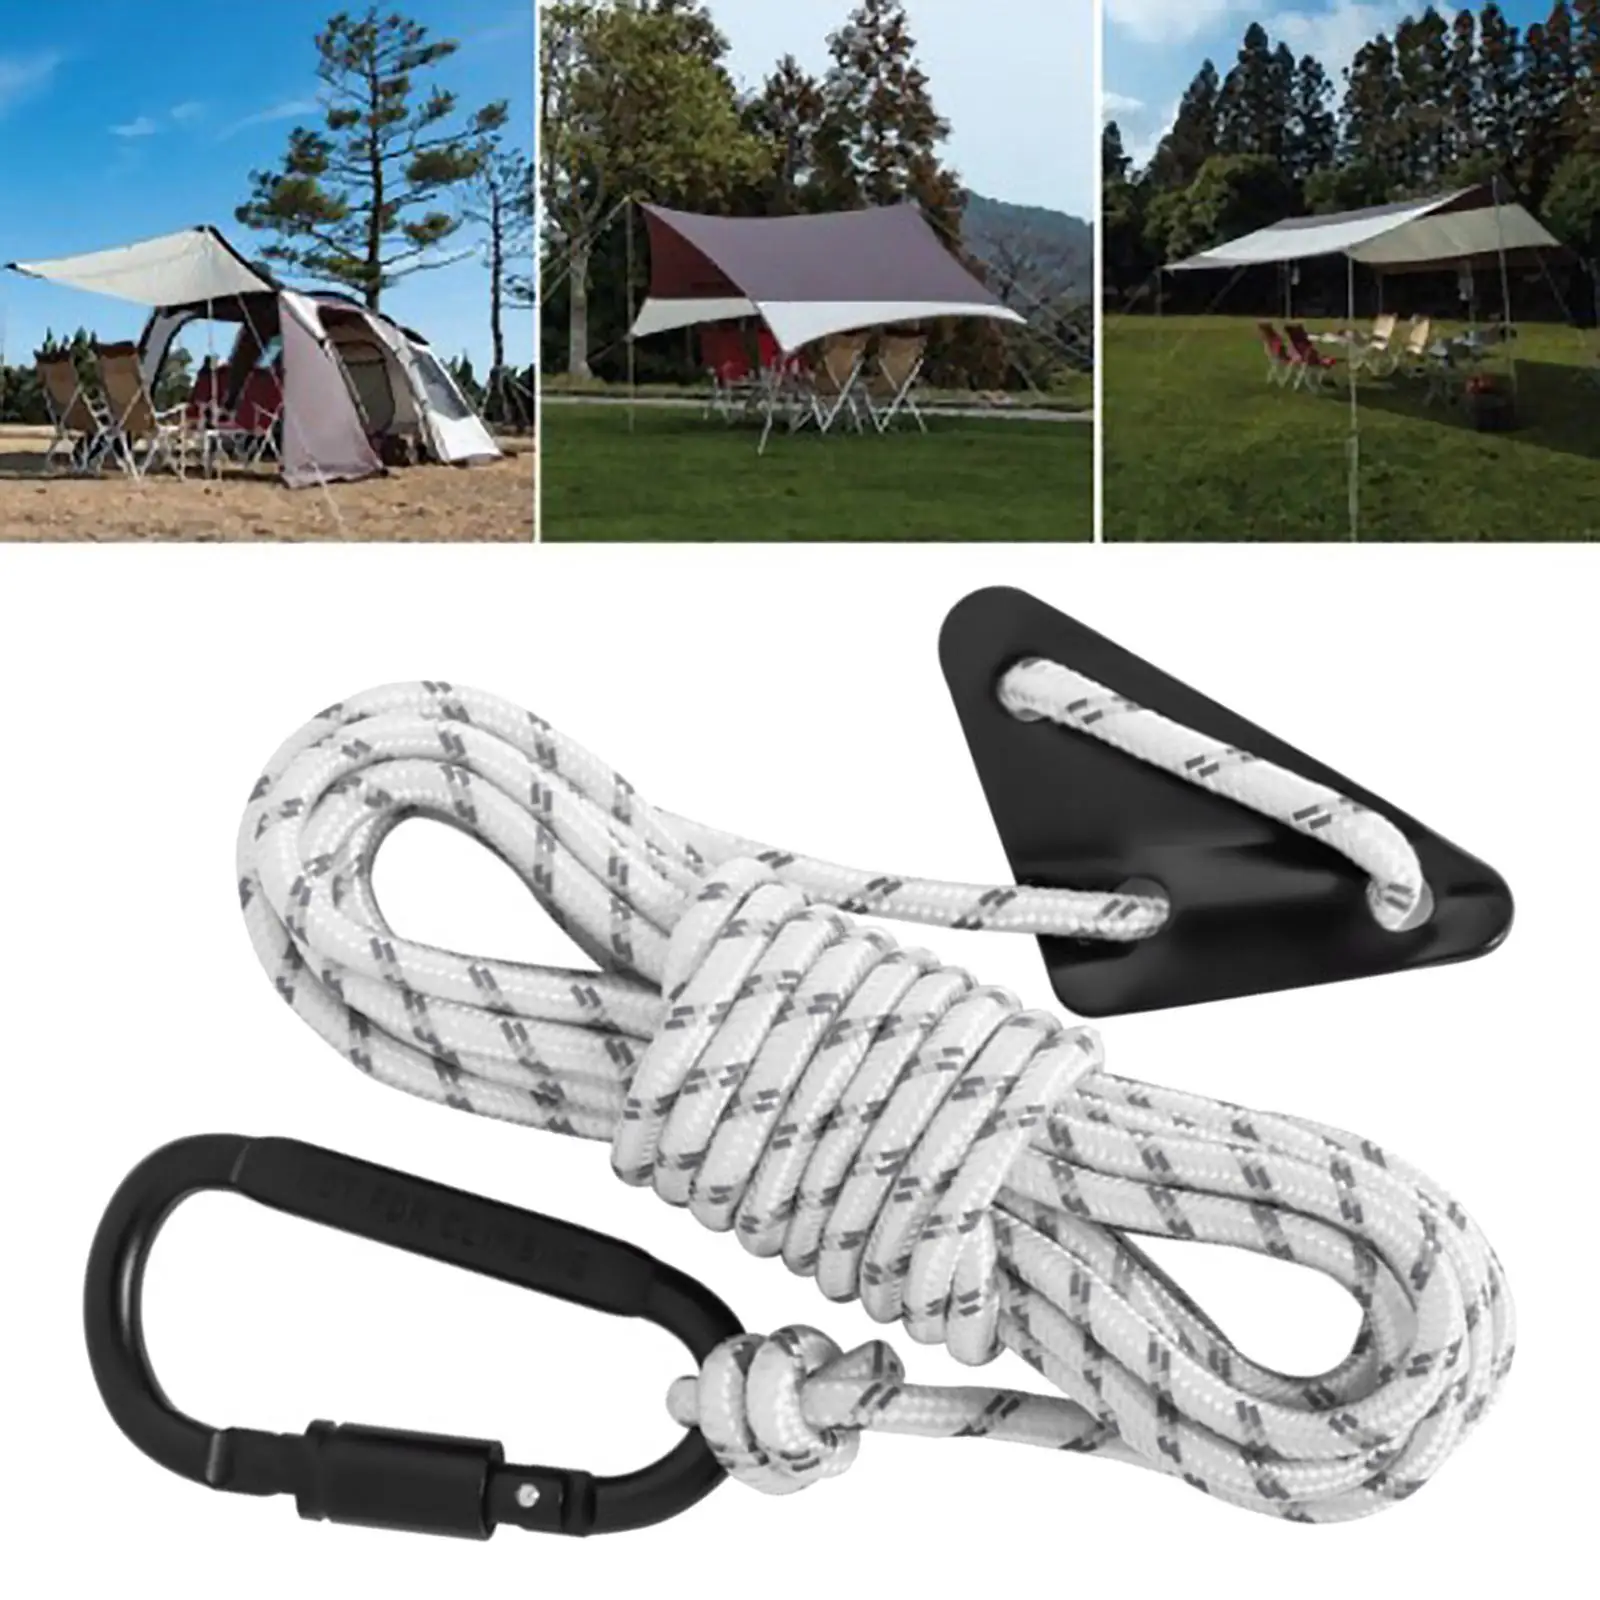 Reflective Tent guyline Guy Lines with Tensioner 5mm Wind Rope for Backpacking